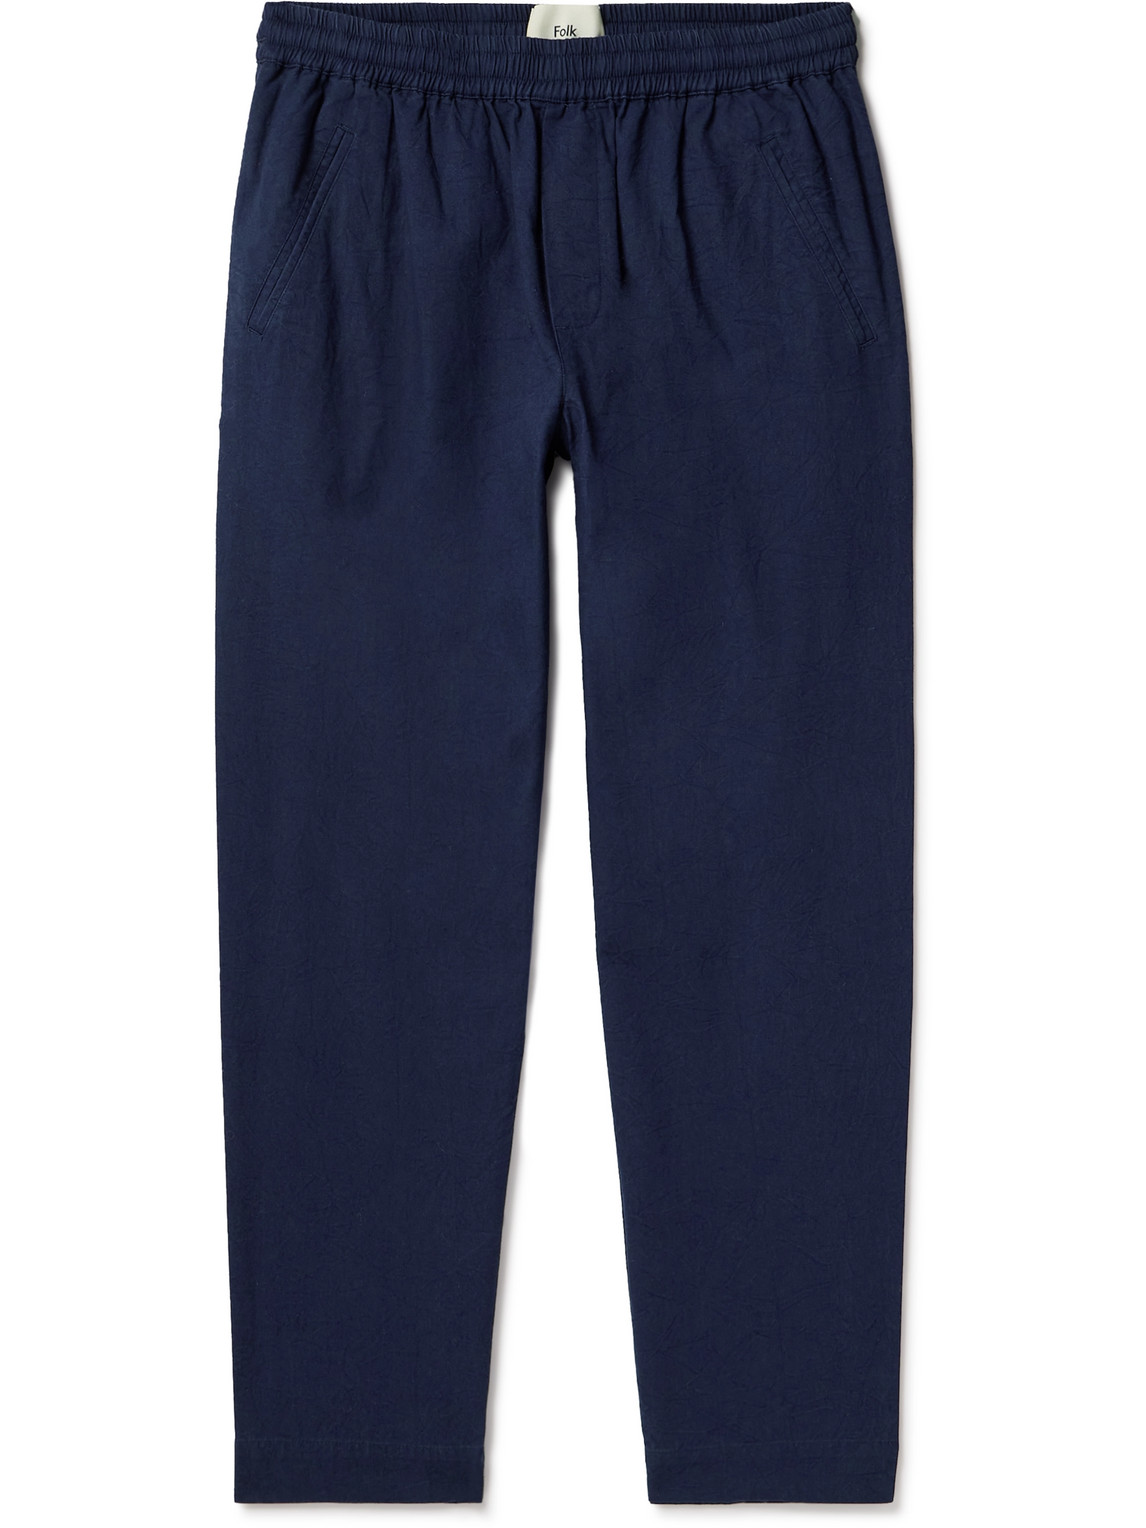 Assembly Cropped Tapered Washed Cotton-Piqué Trousers